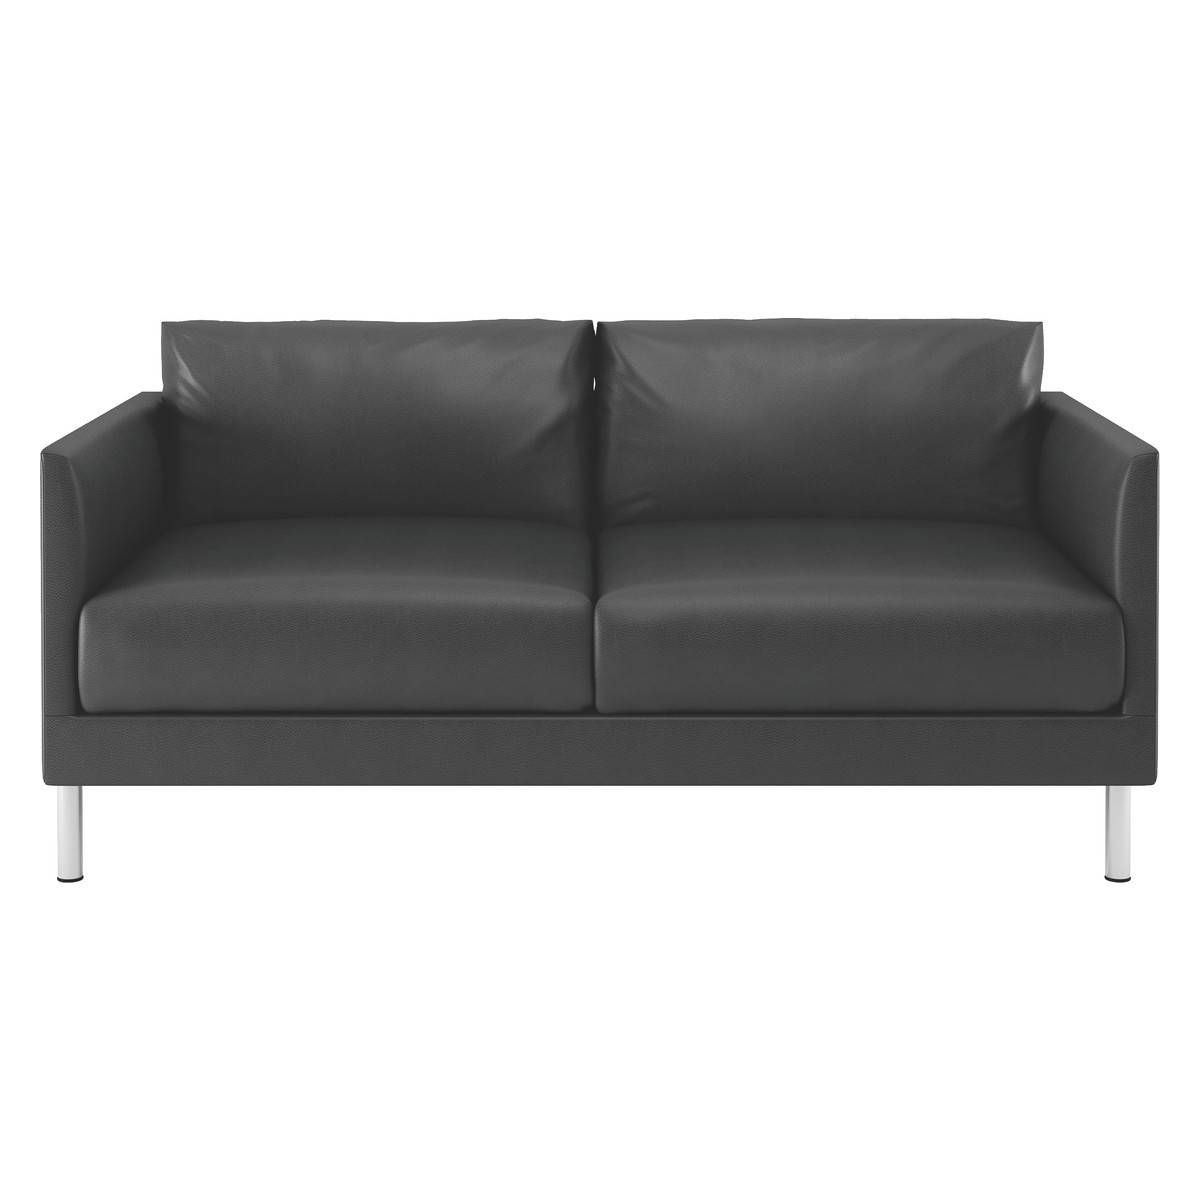 Hyde Black Leather 2 Seater Sofa, Metal Legs | Buy Now At Habitat Uk With Black 2 Seater Sofas (Photo 6 of 30)